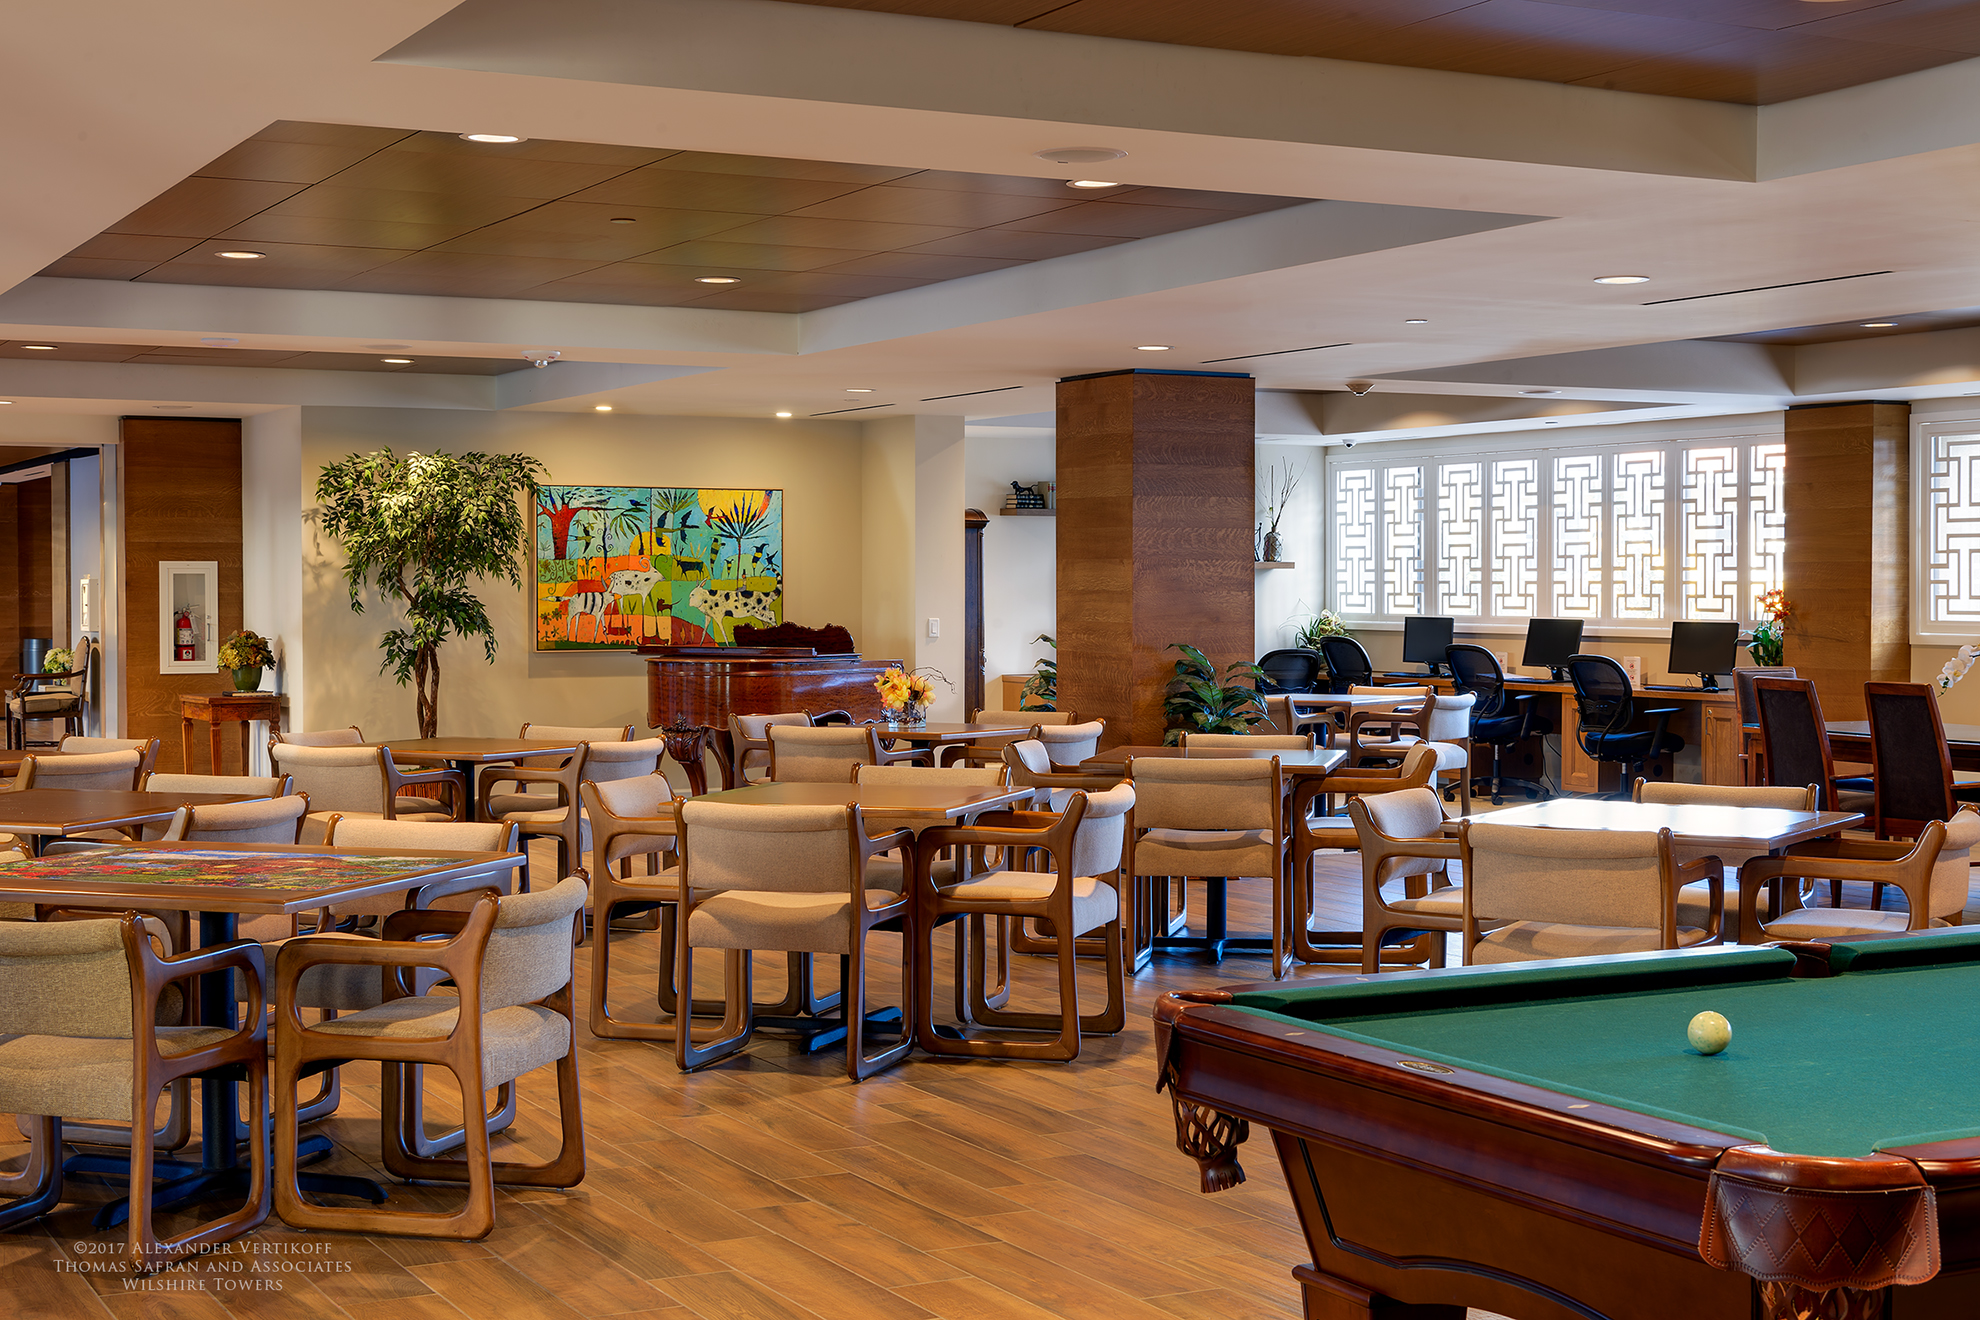 Image of community floor equipped with pool table, furniture, bar, computers and piano